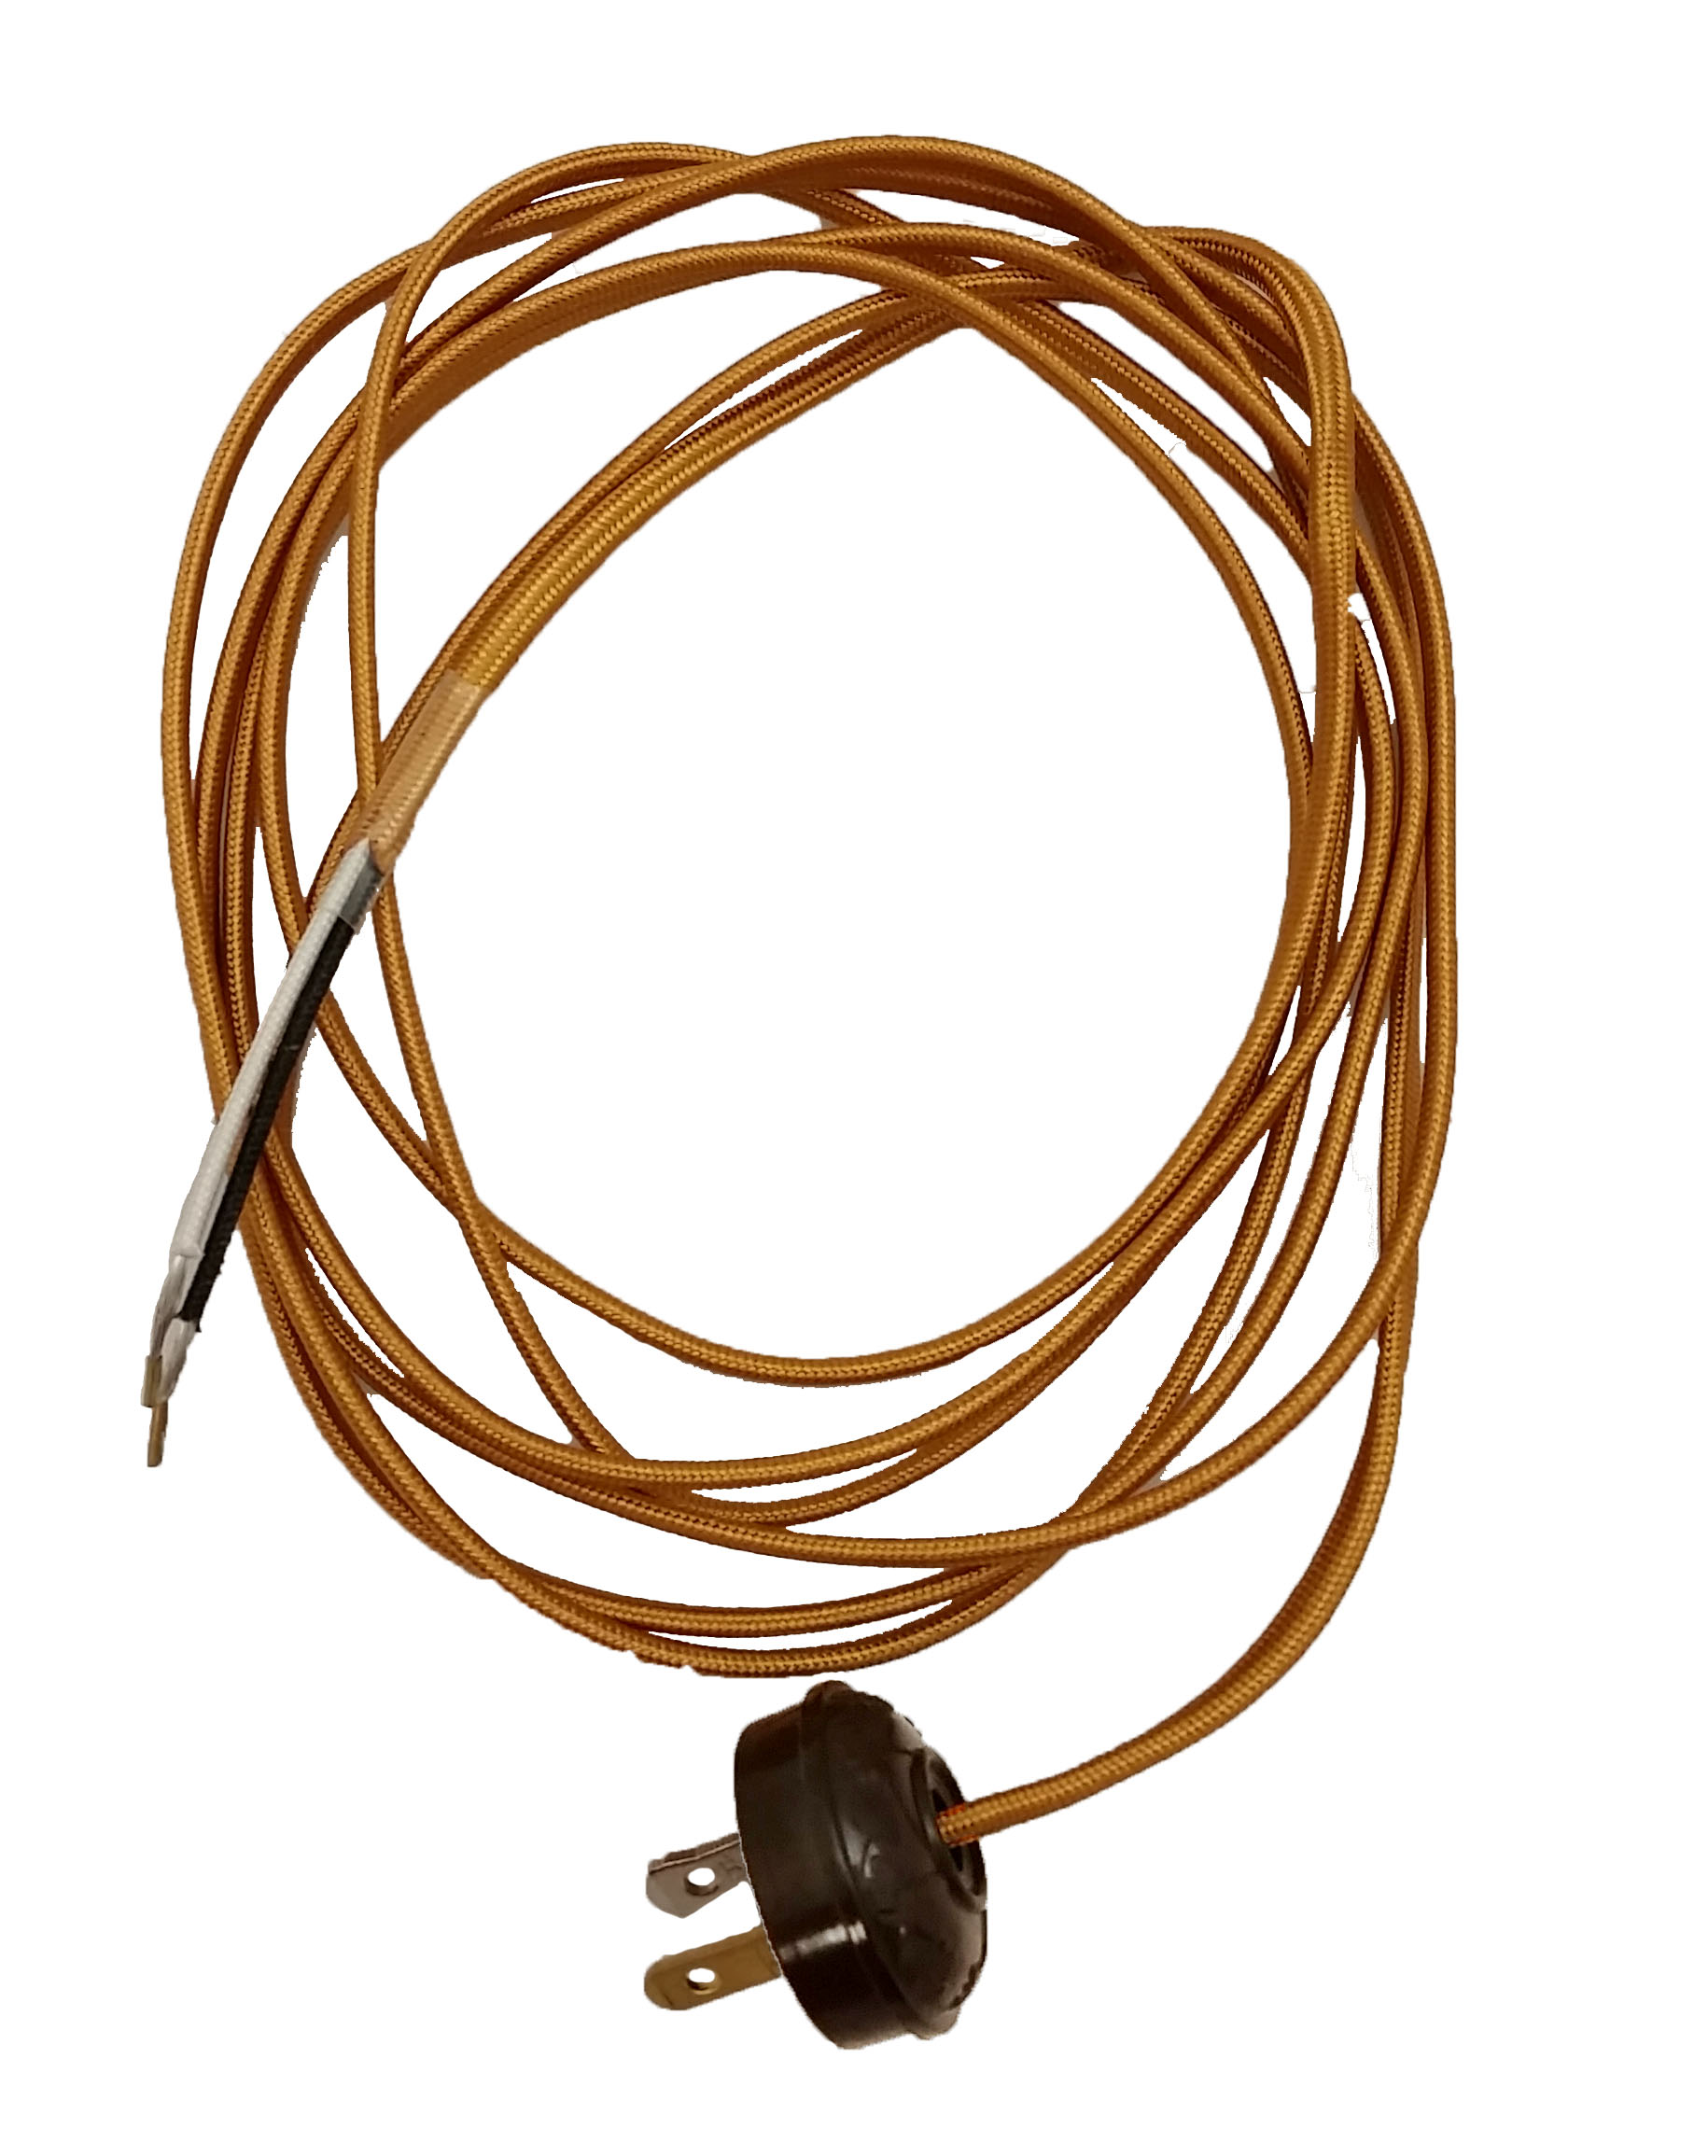 Rayon Lamp Cord Set with Antique Style Plug, Choice of Color 46860 